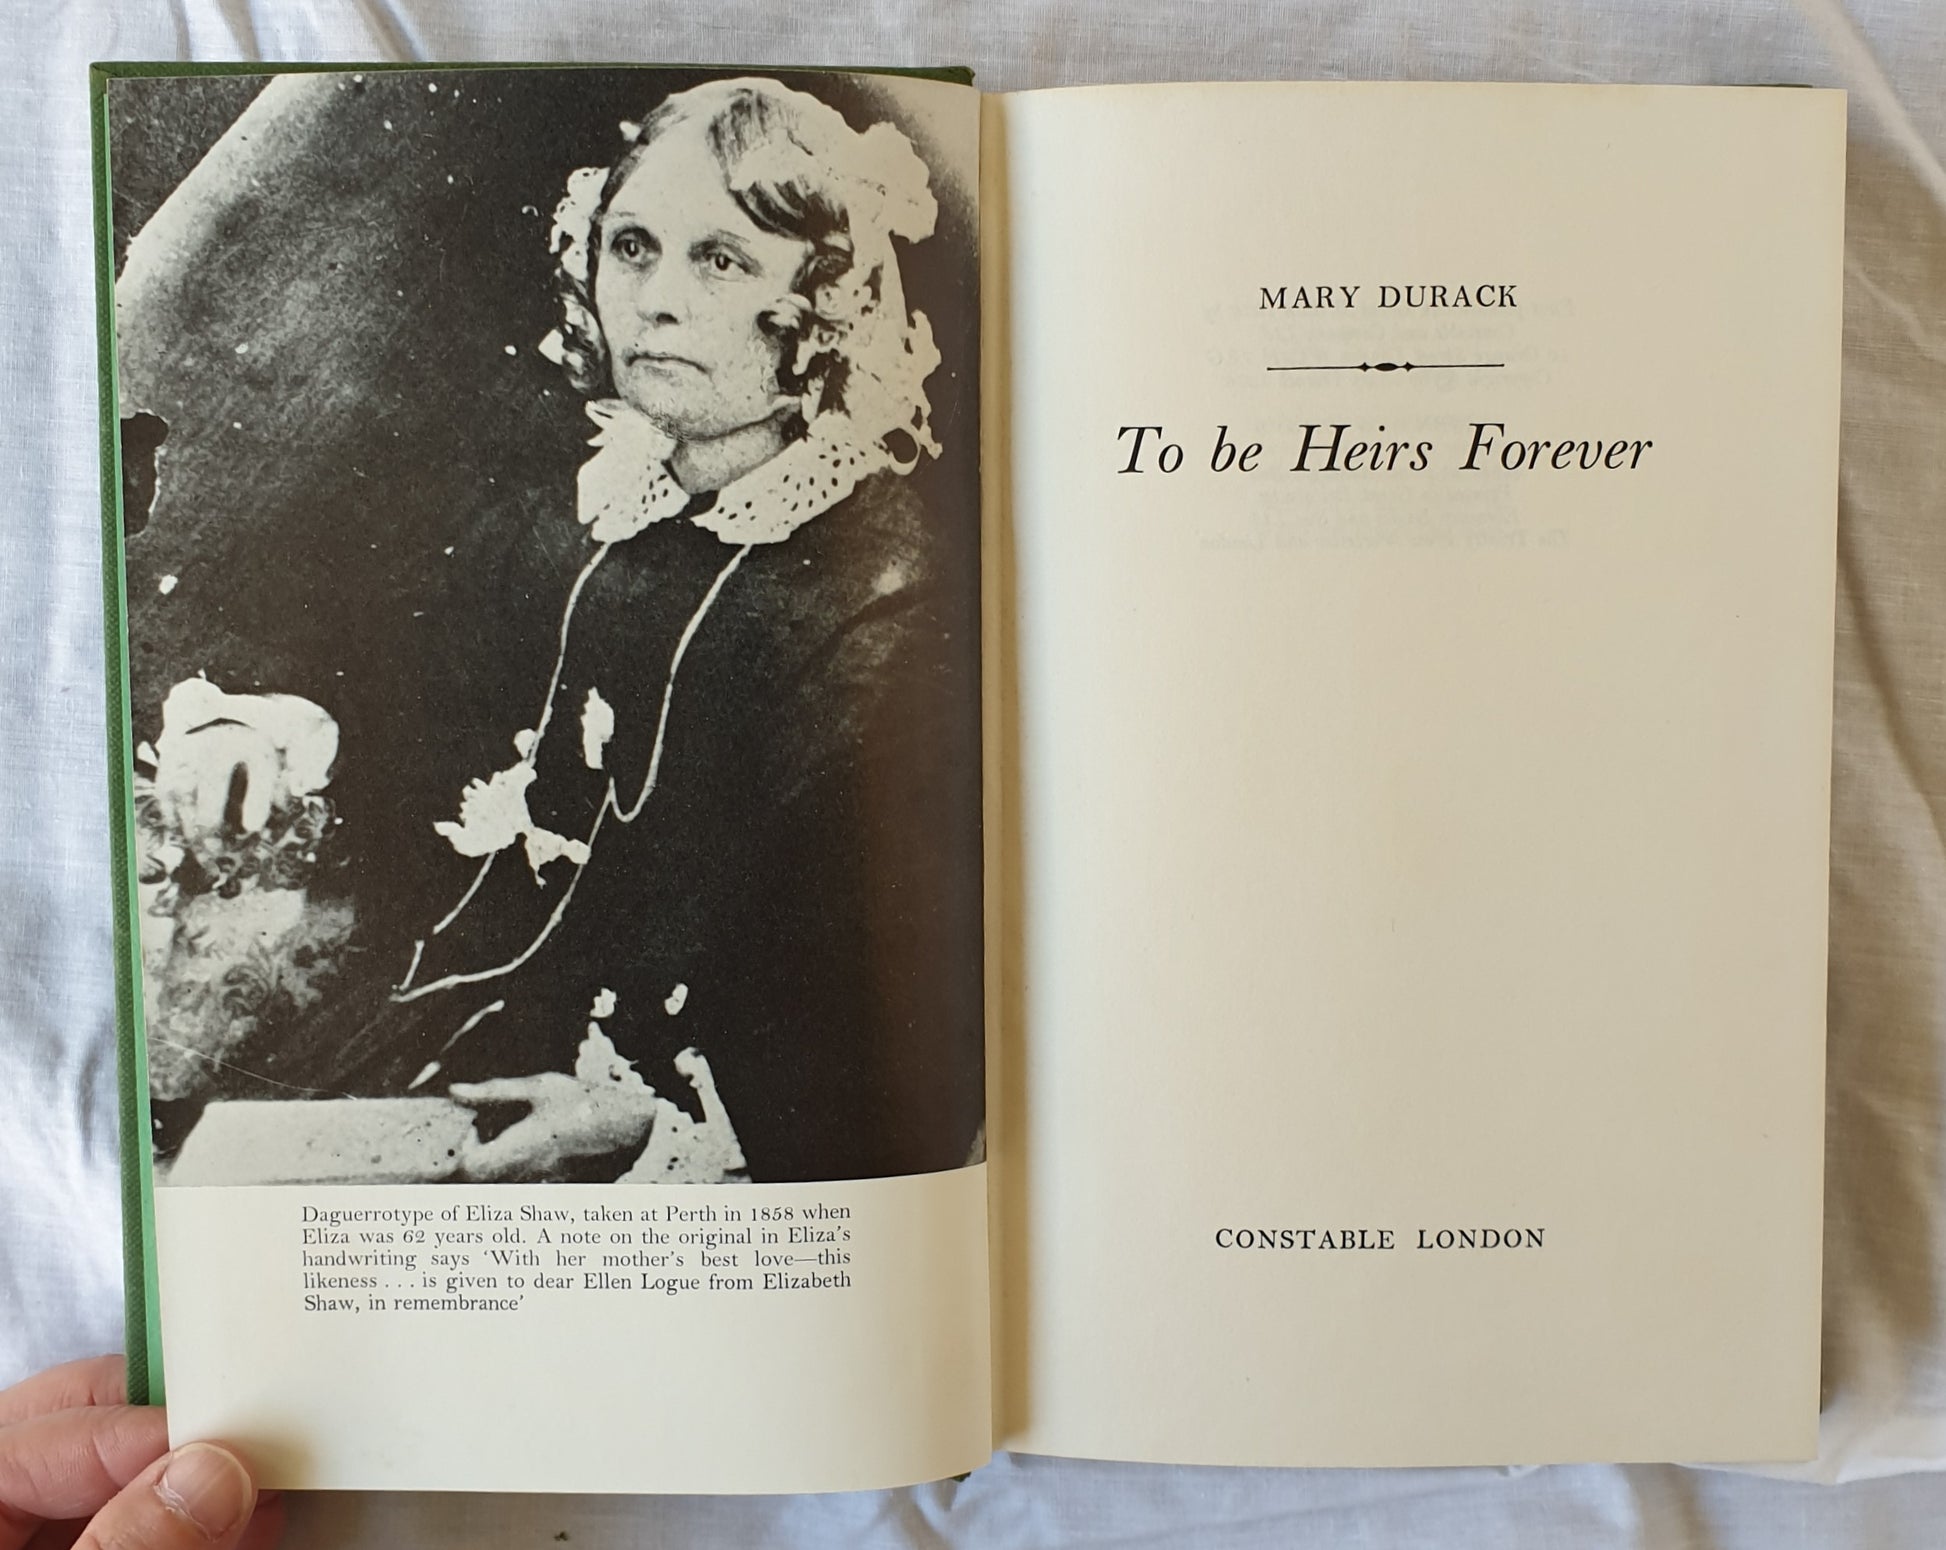 To be Heirs Forever by Mary Durack